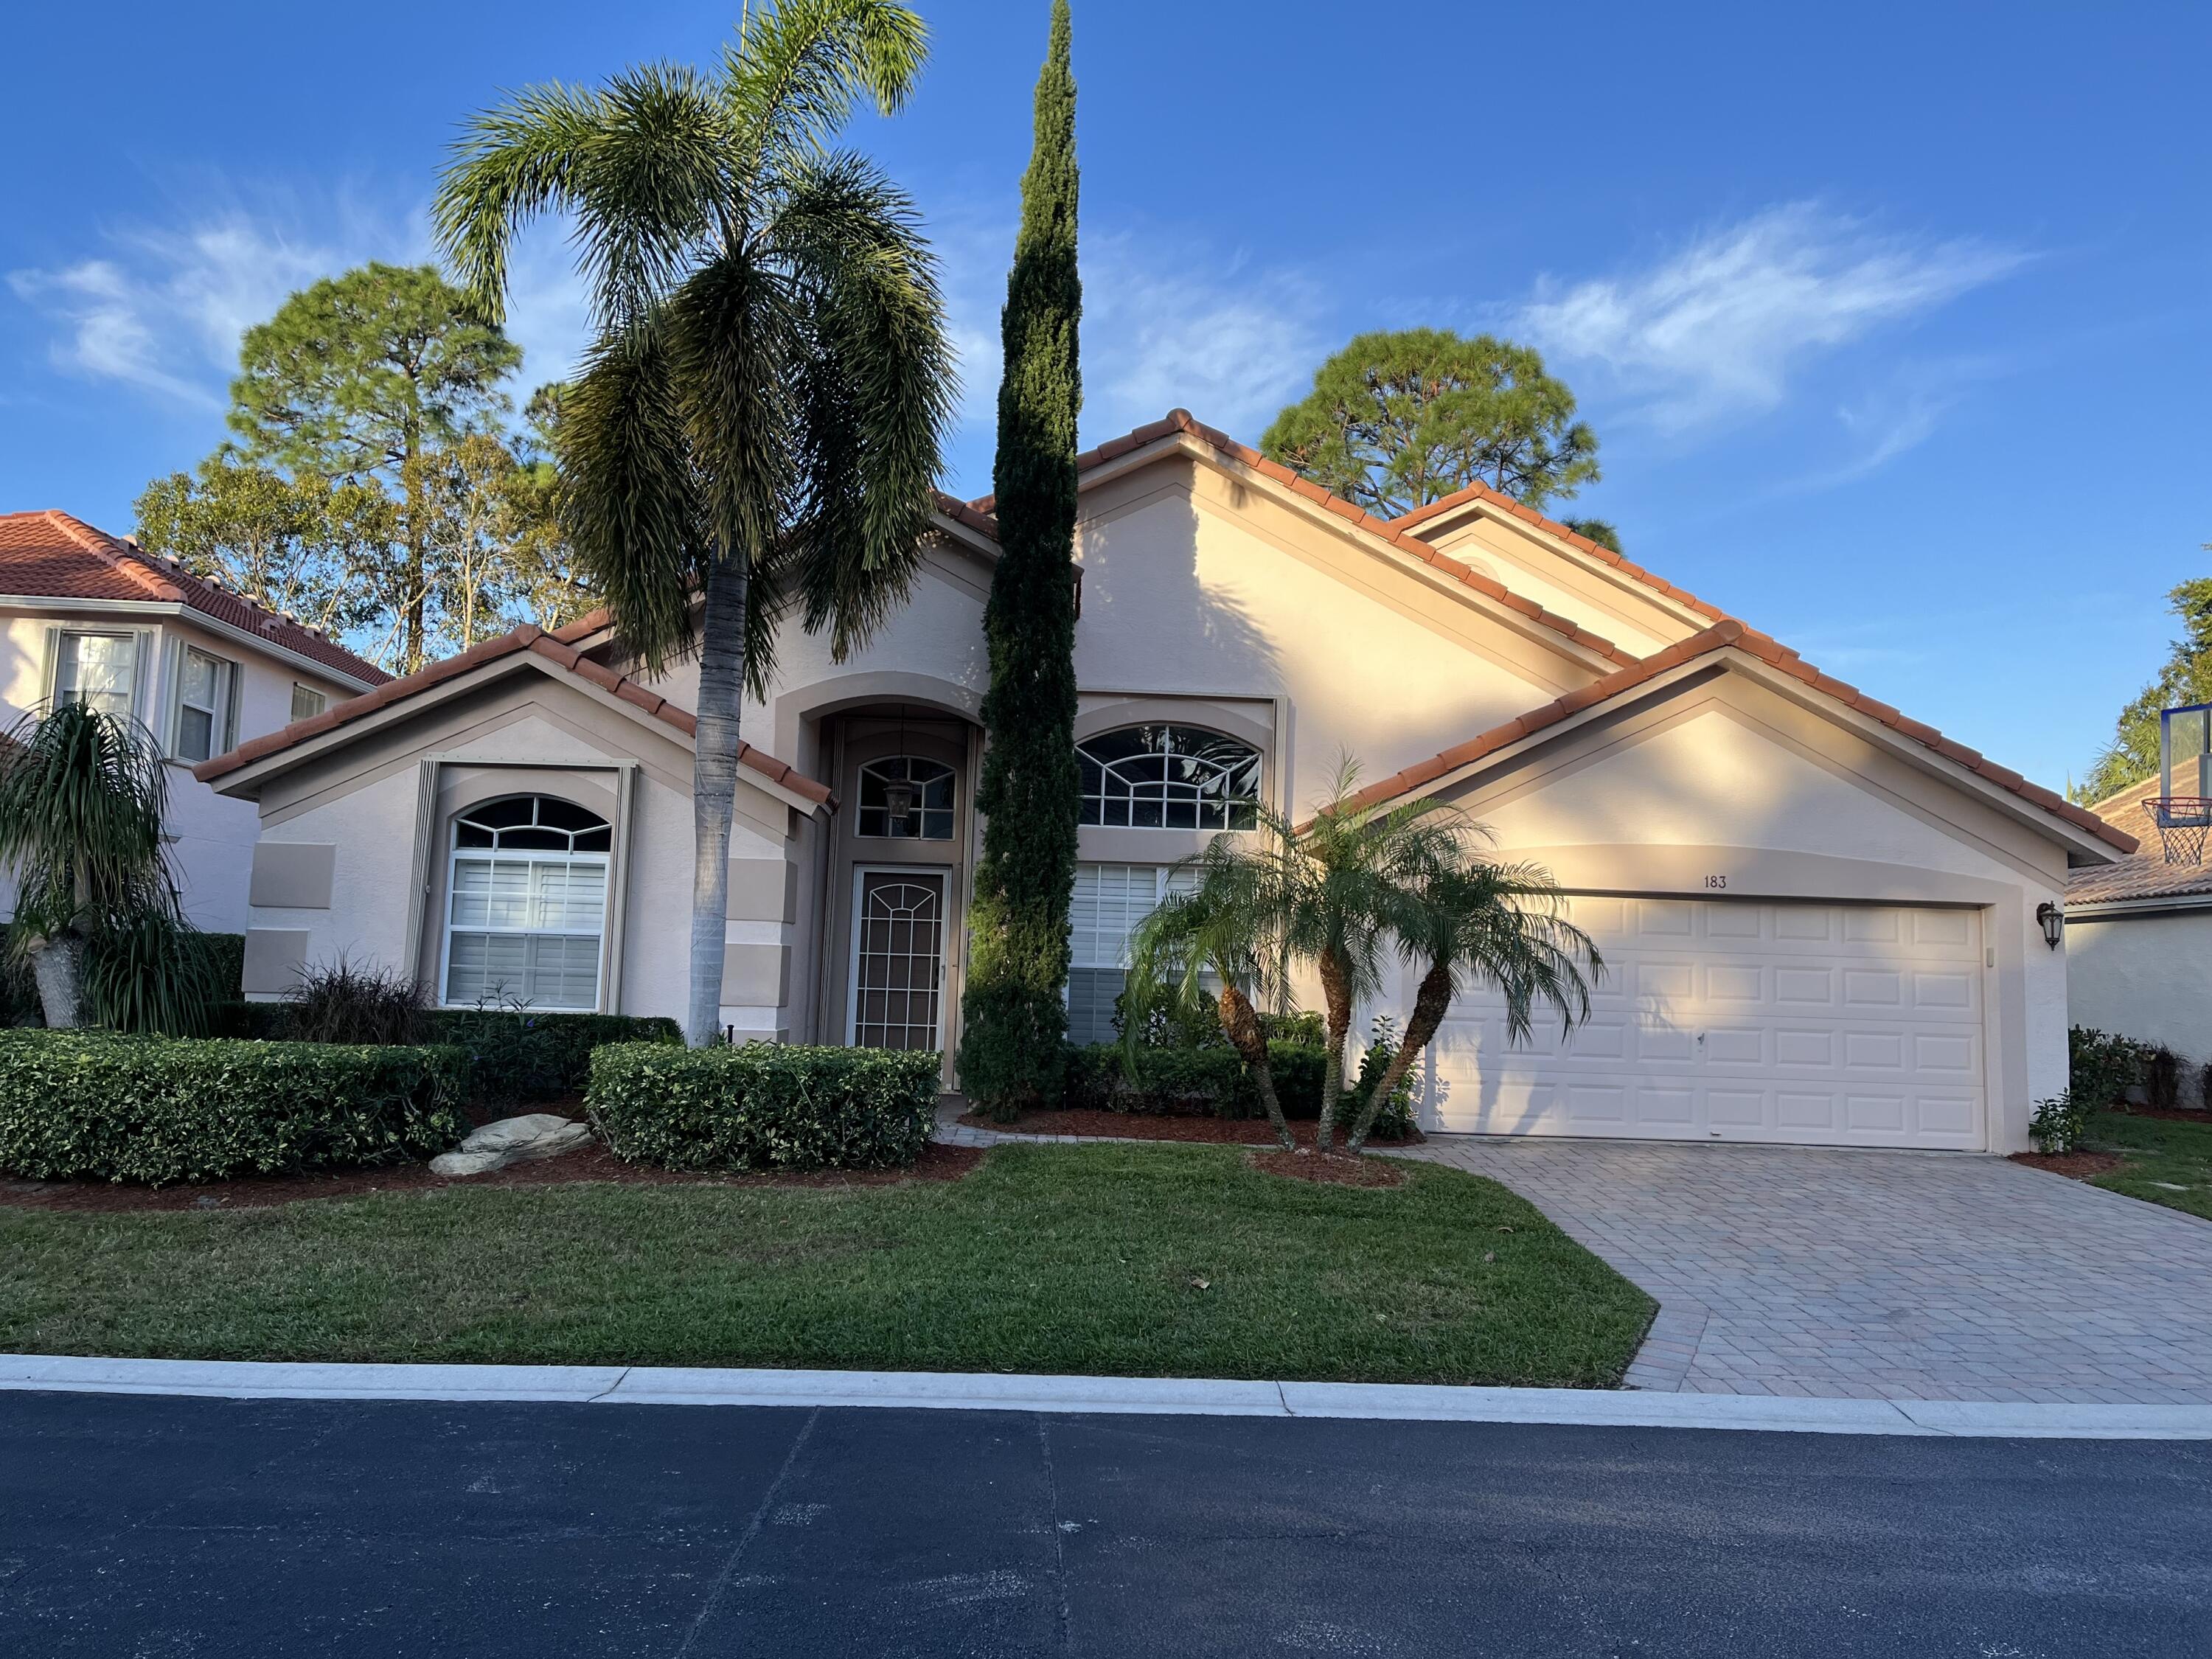 This peaceful family-friendly, gated community is located in the heart of Palm Beach Gardens, in between I95 and Florida's turnpike. Walking distance to high end tennis center and public sports complex, nature trail, fine dining and 2 public schools. This split-bedroom home features the primary suite, plus an additional bedroom and bathroom on the main level. The second floor features a loft space that overlooks the family room, along with 2 bedrooms and a Jack and Jill bathroom. Access the back patio through sliding doors in the family room or french doors in the dining room. The outdoor space includes a private chlorinated pool under a screen enclosure with pebble tech deck, plus extra space to dine, relax, entertain. Seller is motivated, bring ALL OFFERS!